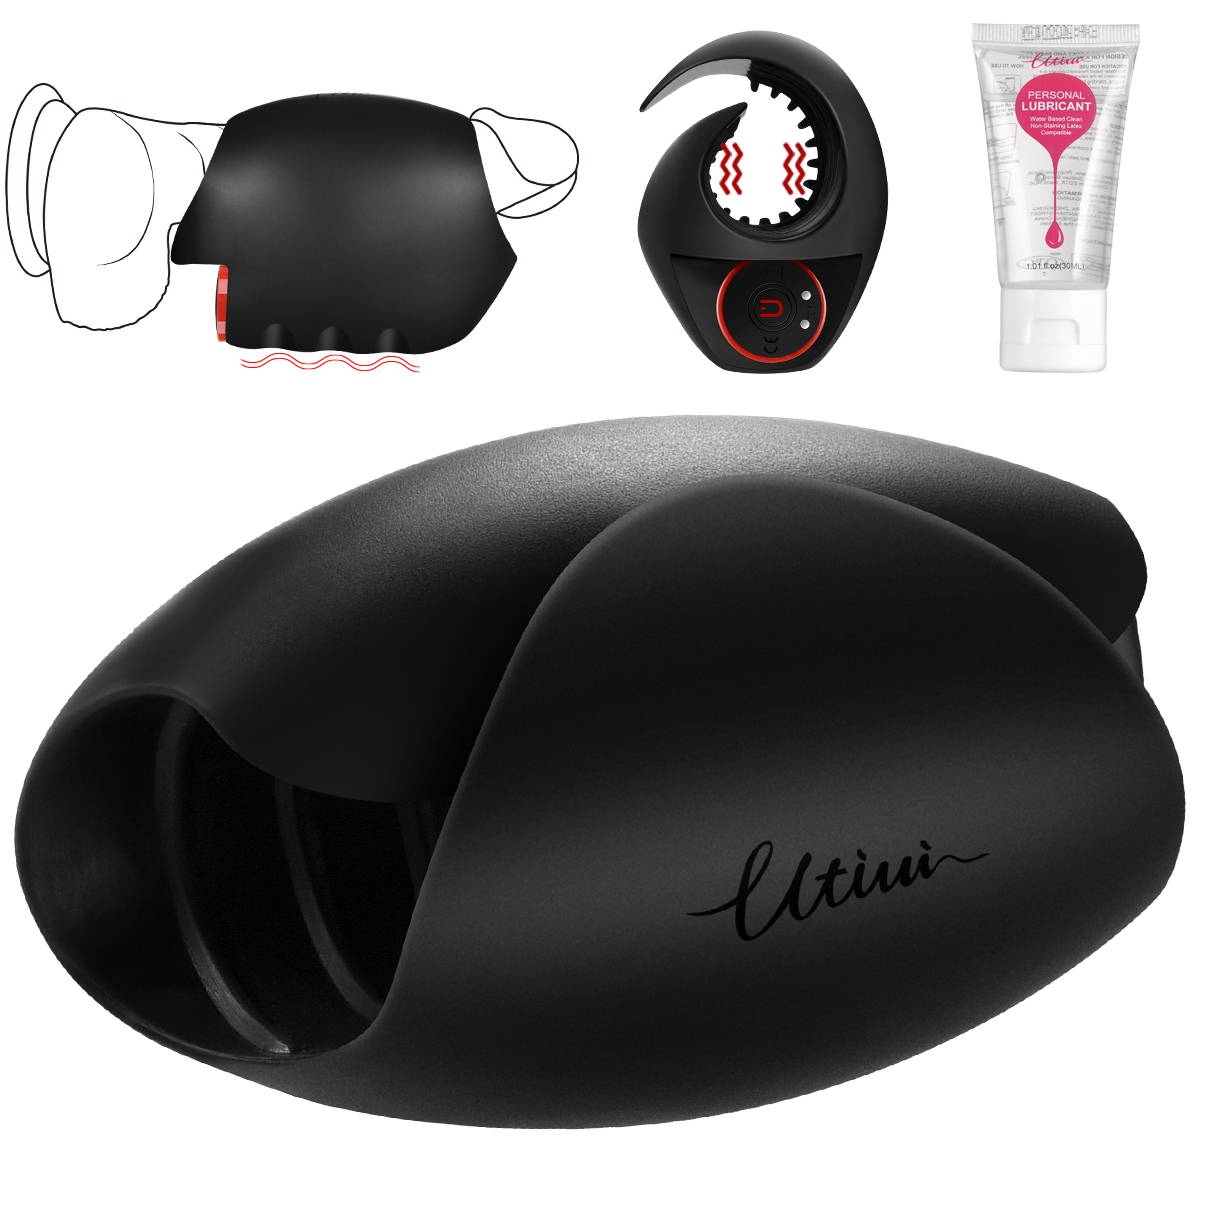  Utimi Handheld Vibrating Masturbation Cup With Water Based Clean Lubricant